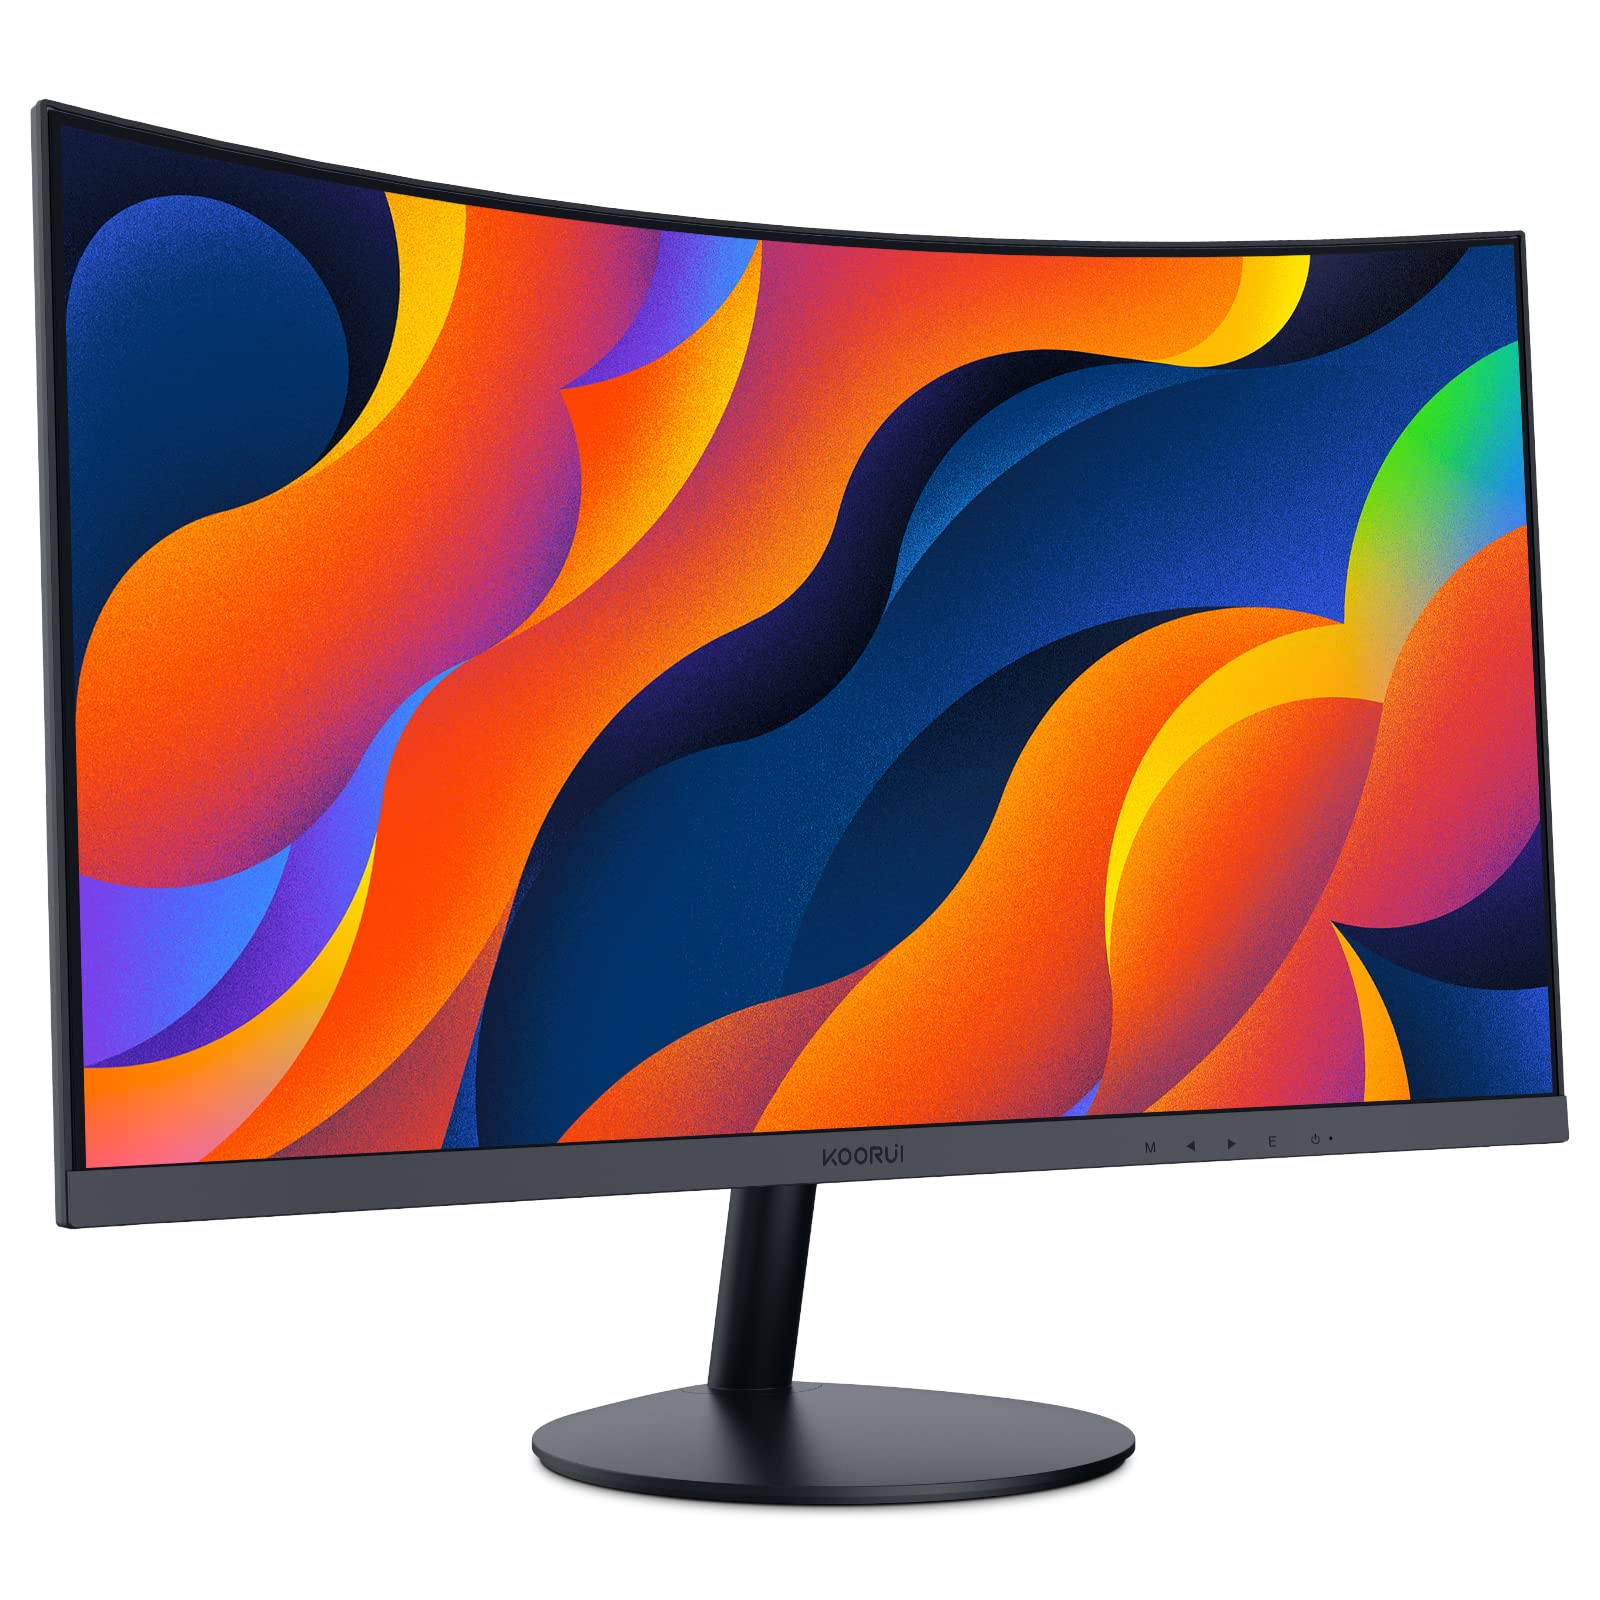 What Type Of Display Is A Typical Computer Monitor?